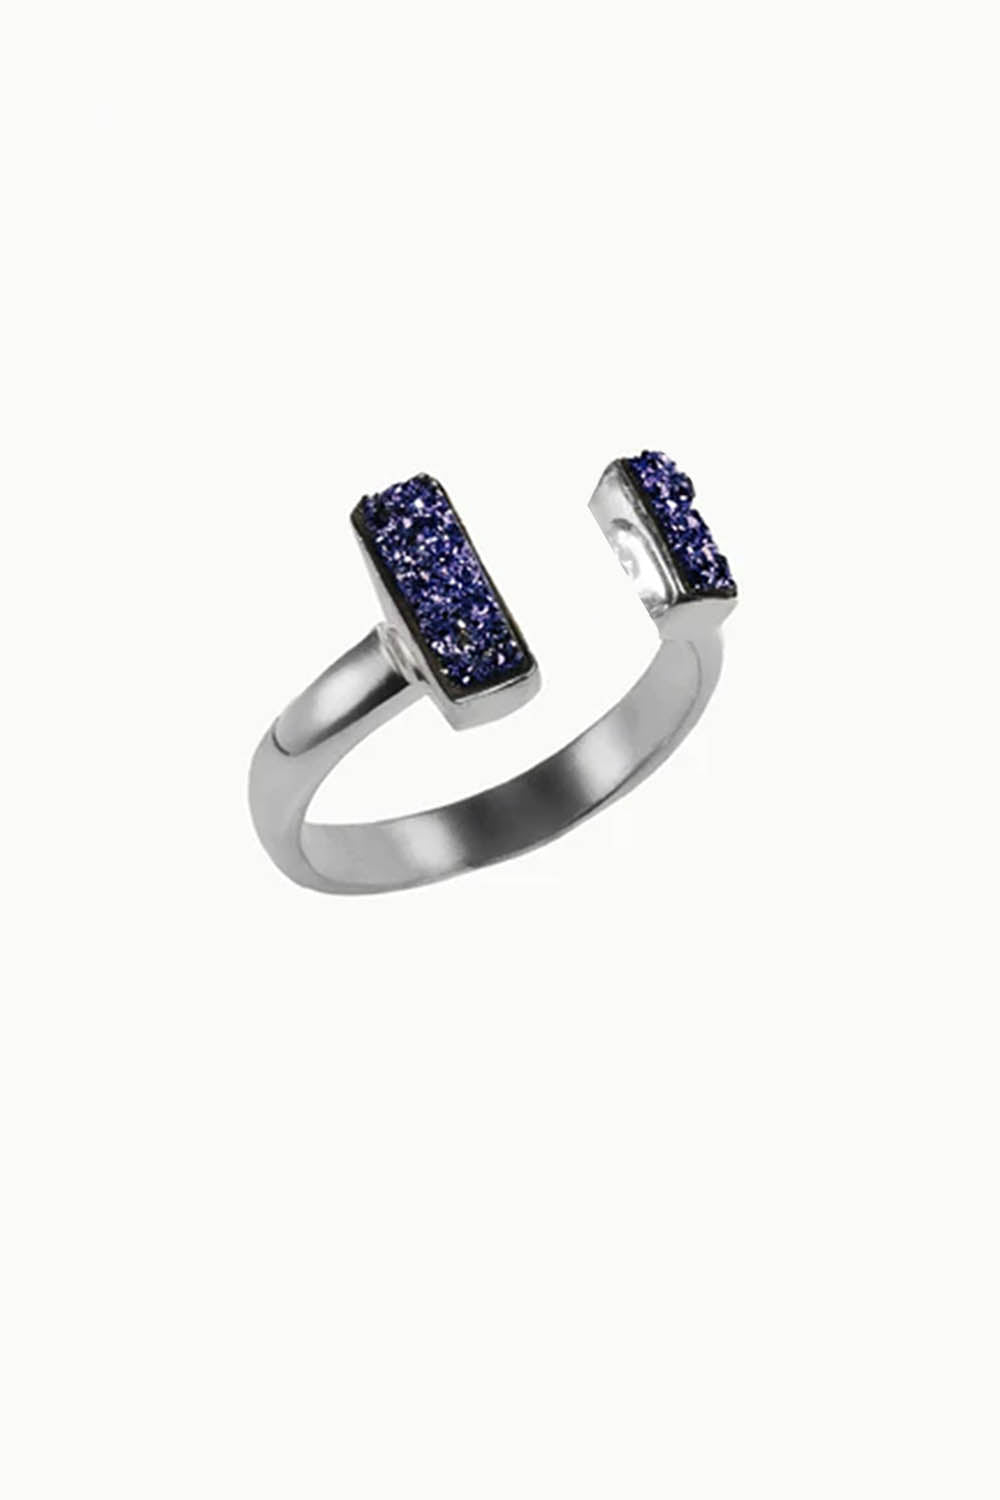 Sivalya Navy Blue Druzy Adjustable Pinky Ring in Sterling Silver